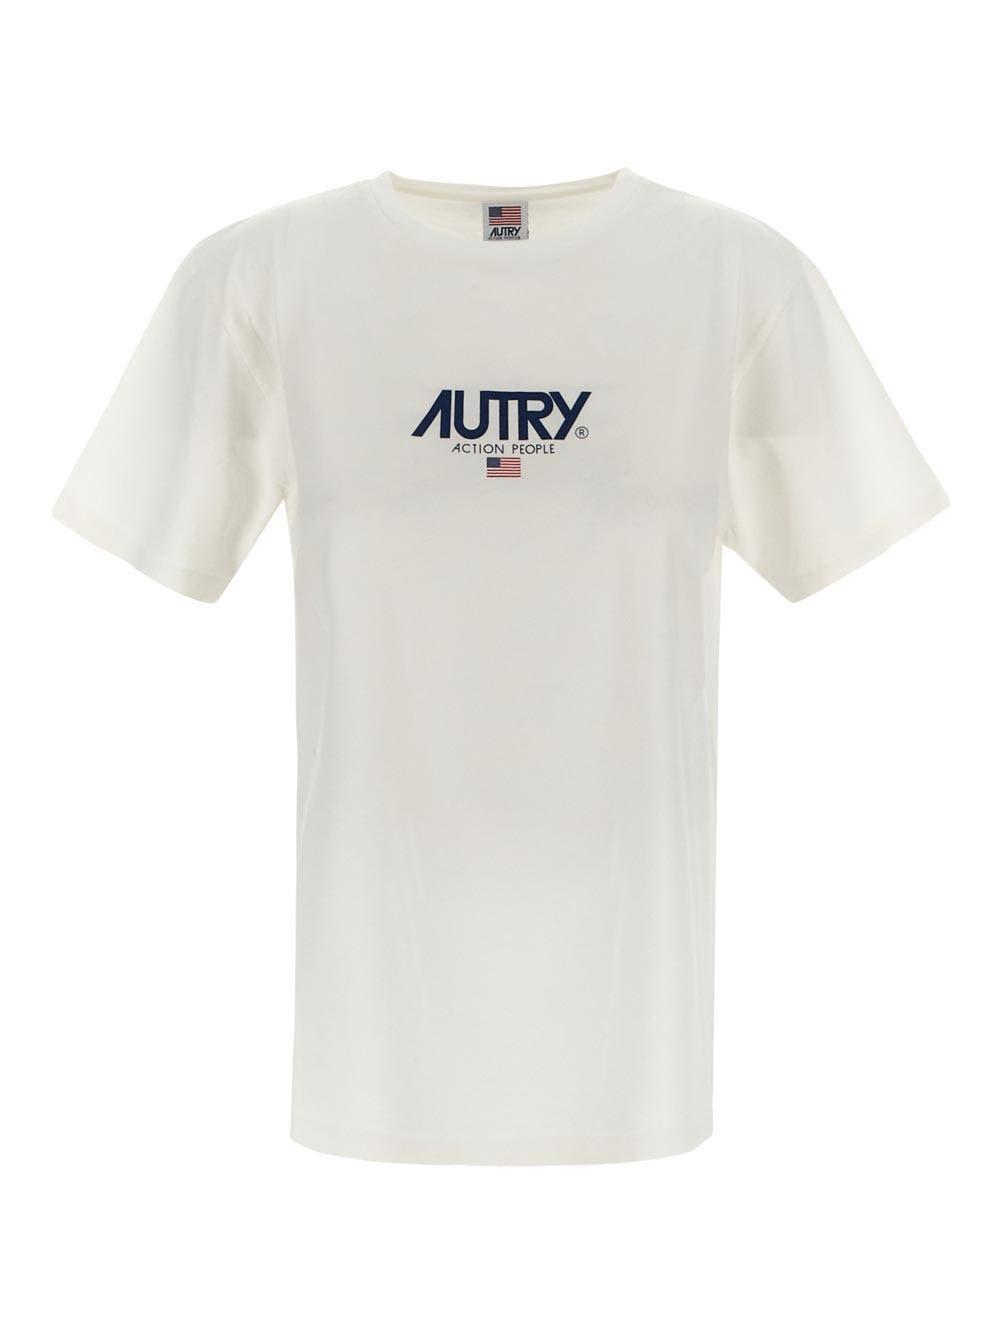 Autry Iconic Action T-shirt In White